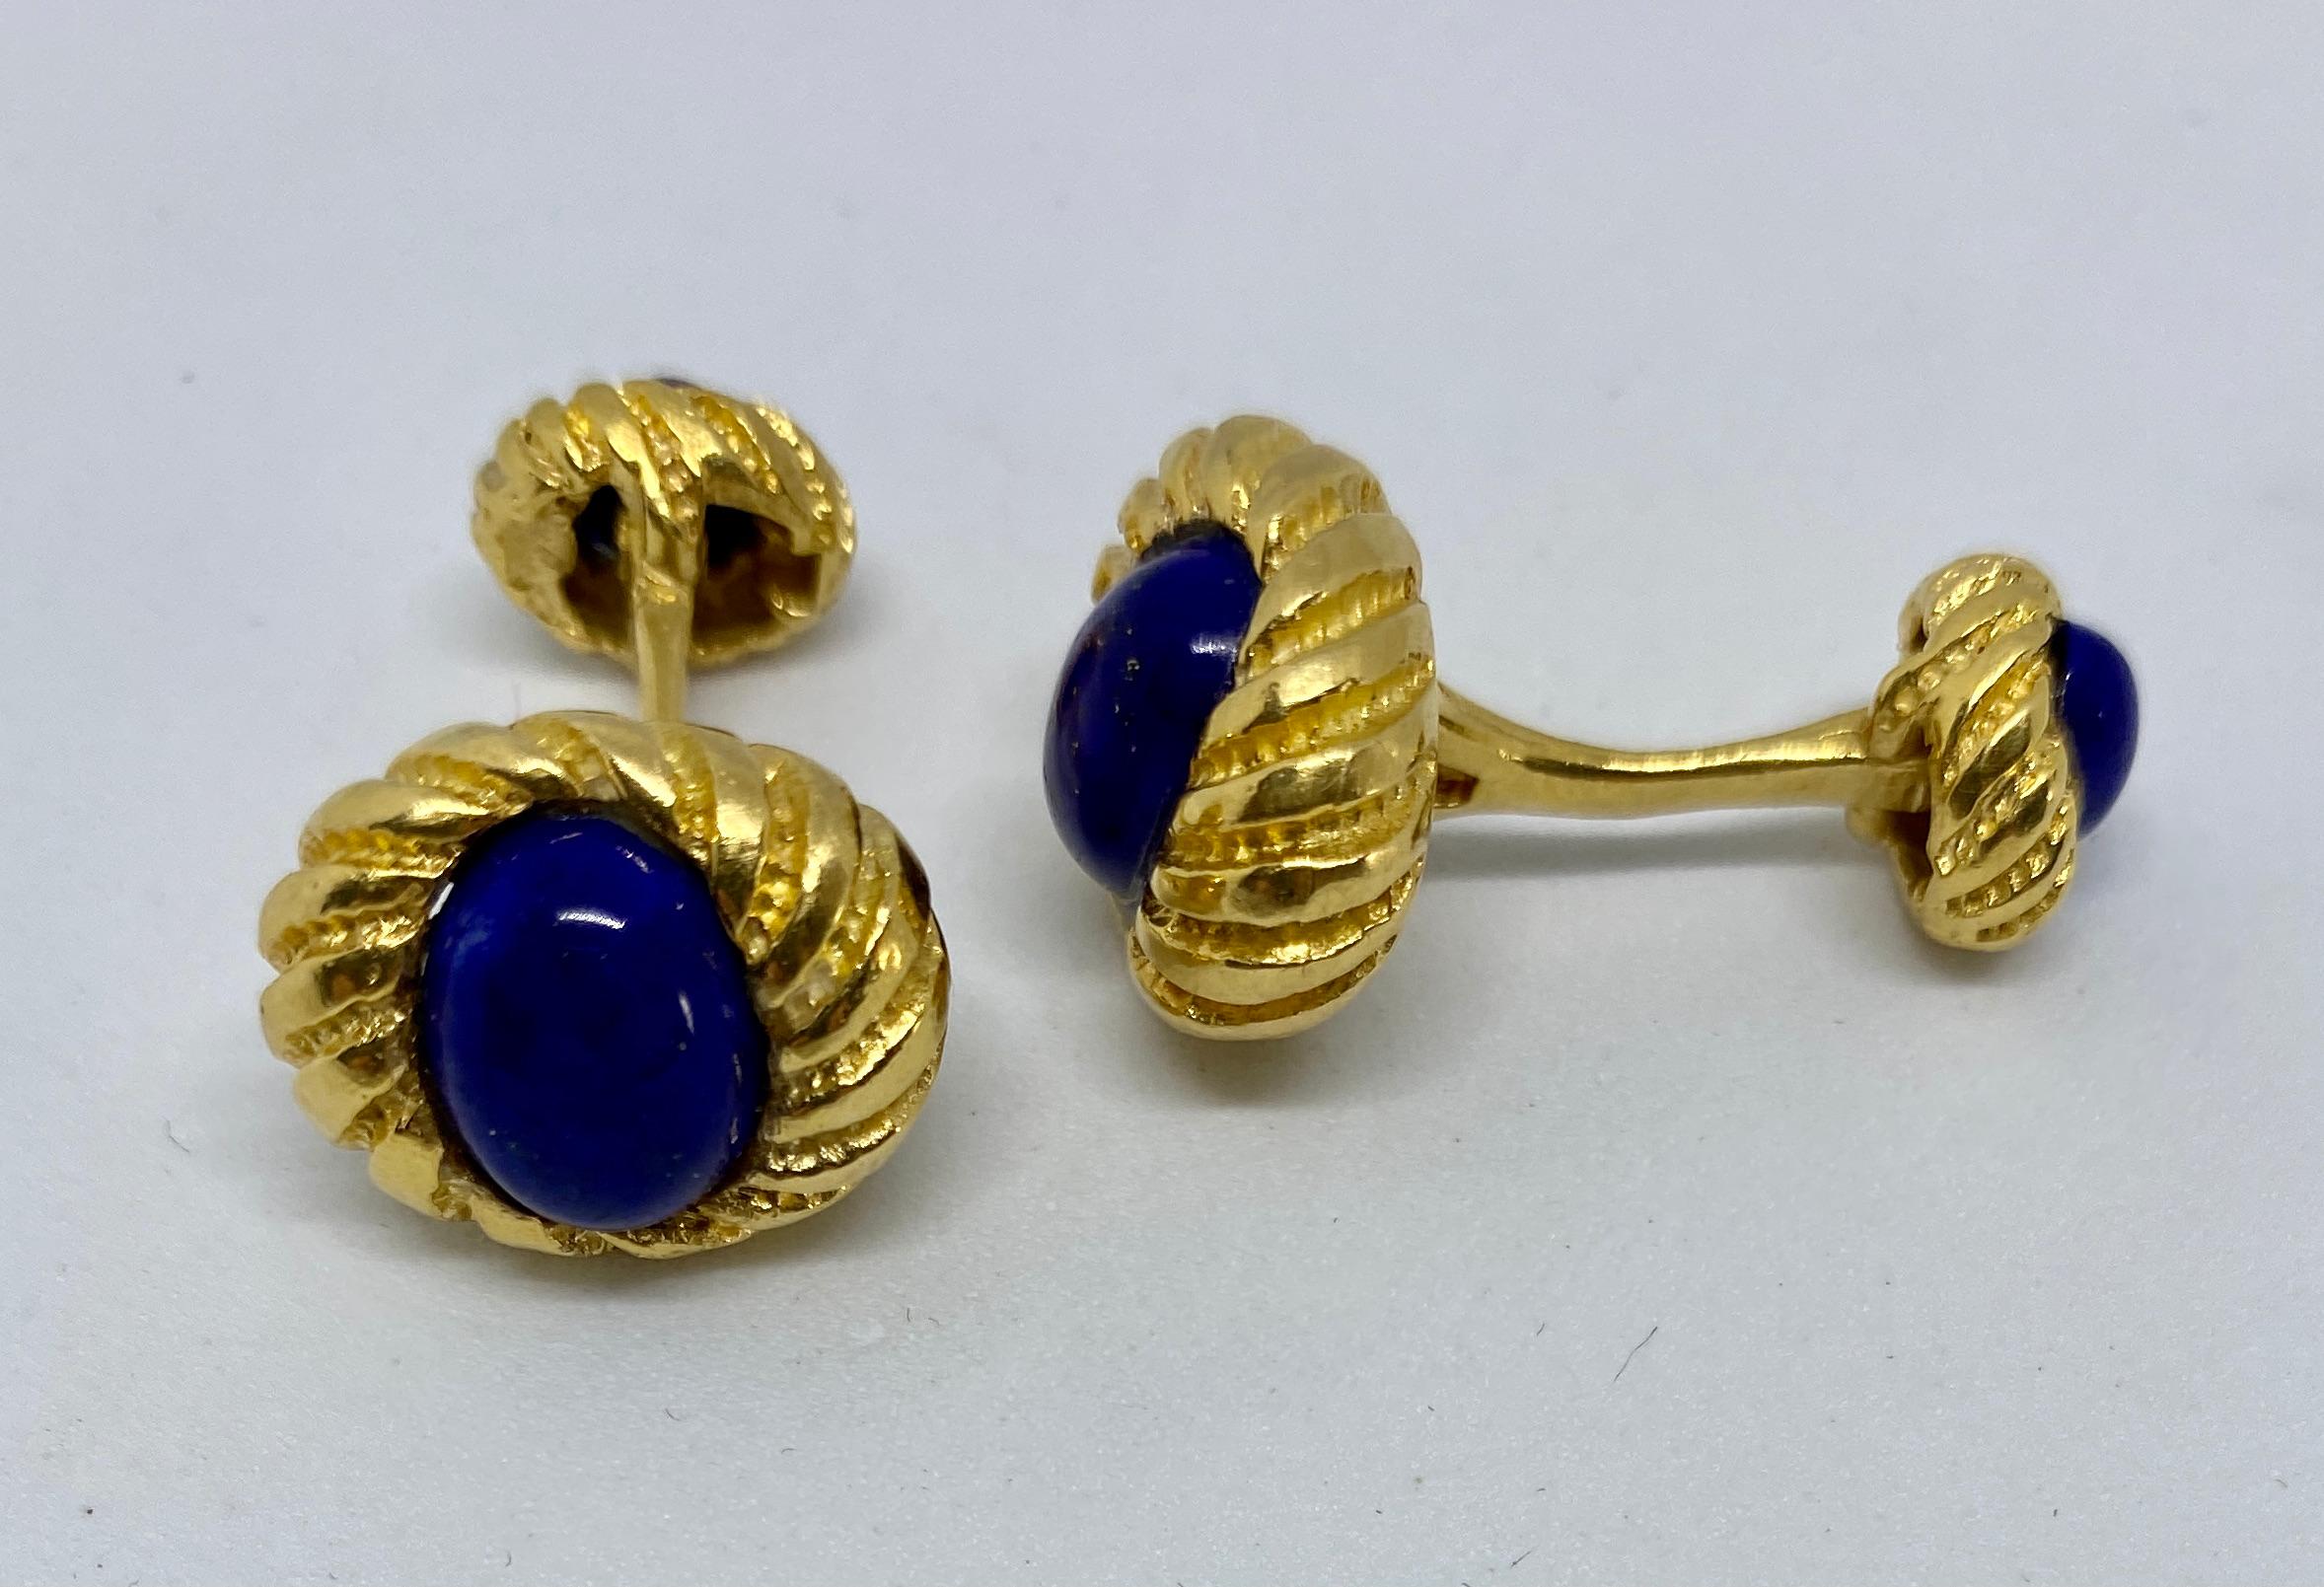 A classic design, these double-sided cufflinks feature four cabochon-cut lapis ovals set in 18K yellow gold.

These cufflinks were designed by Jean Schlumberger for Tiffany & Co. However, some overly zealous cleaning buffed out the marks on the